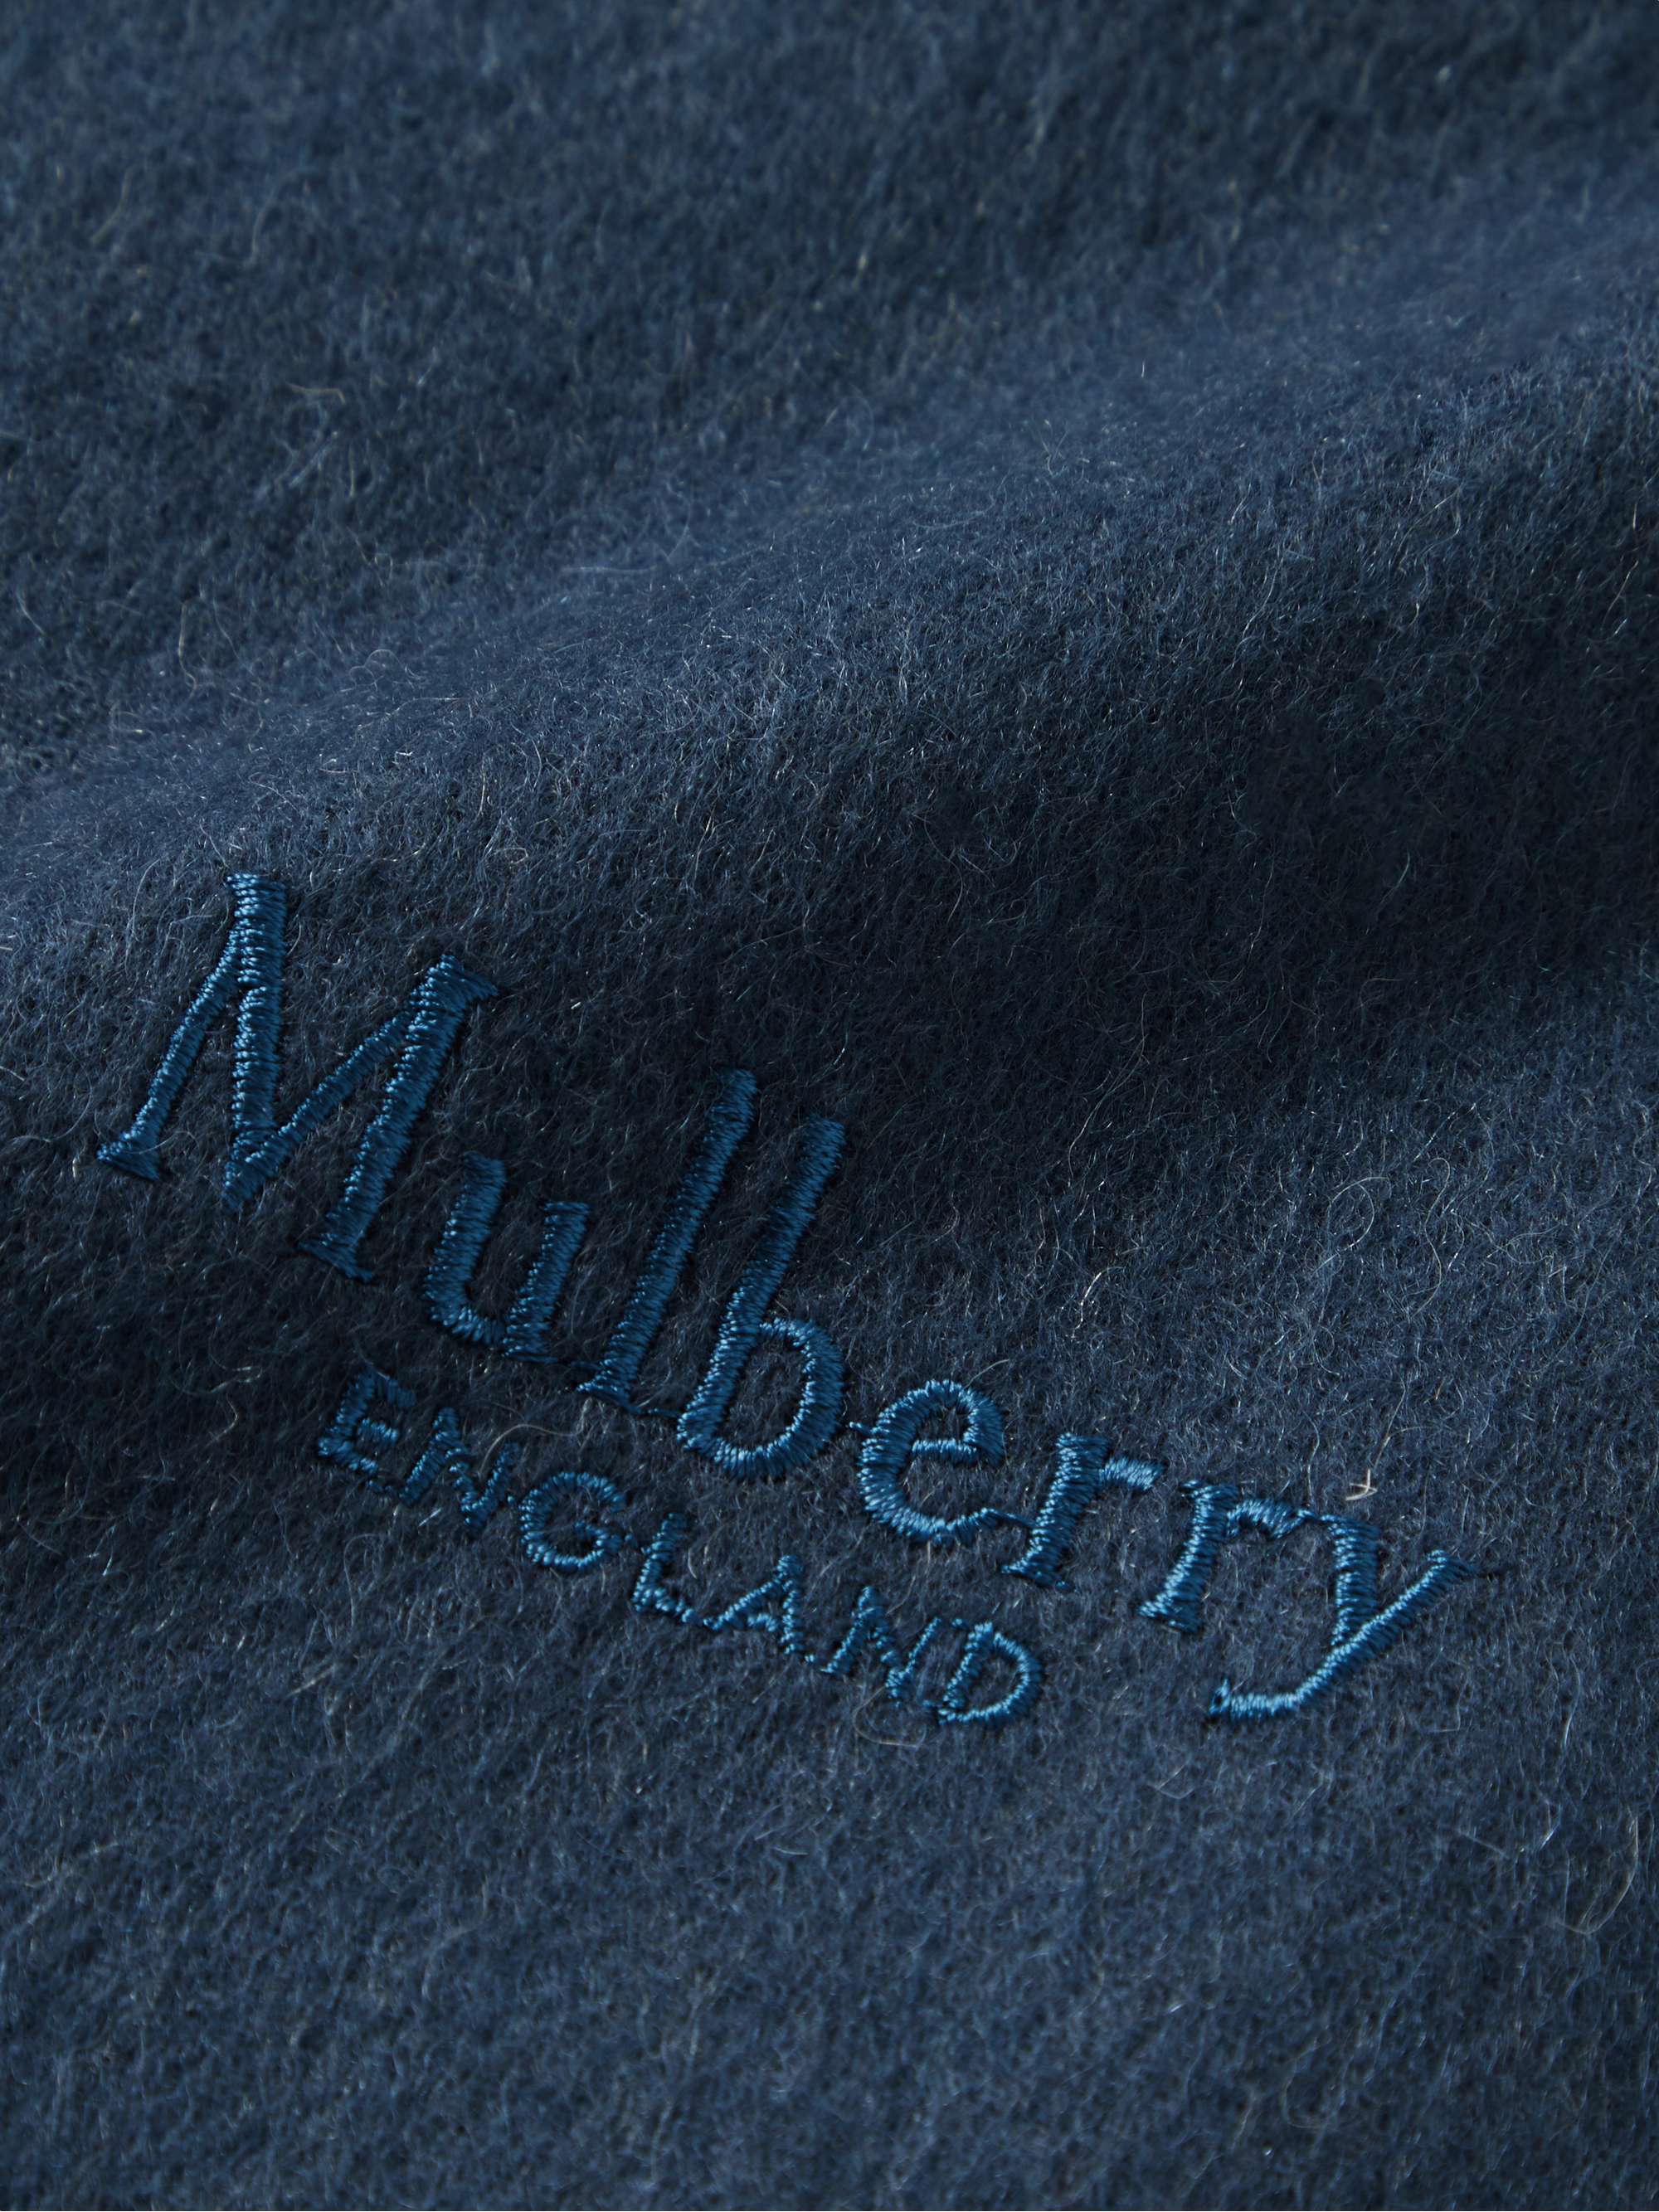 MULBERRY Logo-Embroidered Fringed Lambswool Scarf